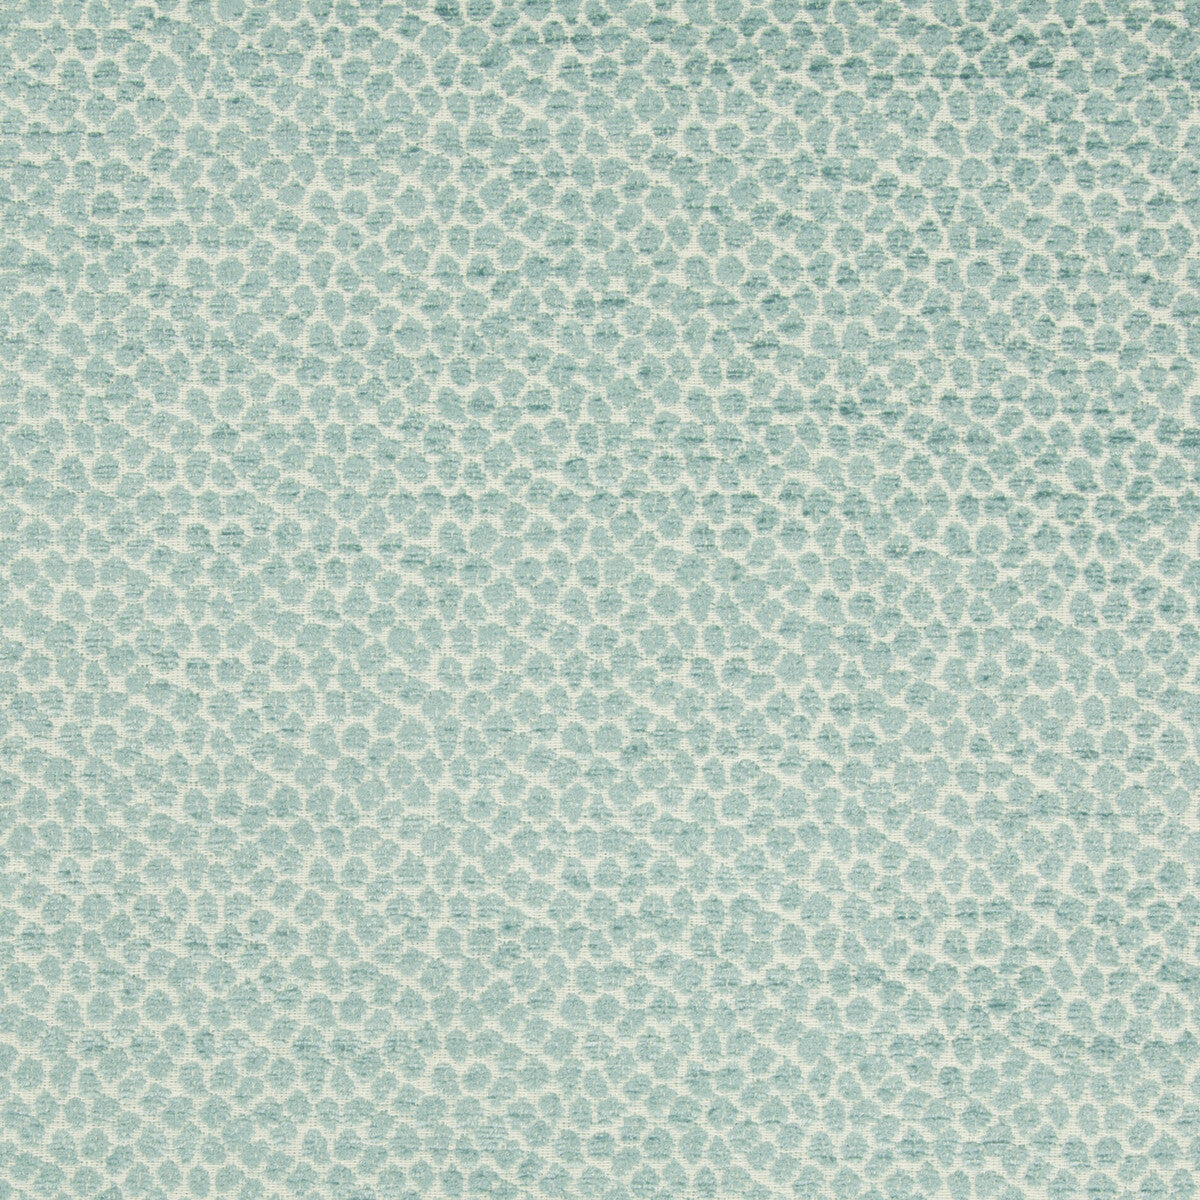 Kravet Contract fabric in 34745-15 color - pattern 34745.15.0 - by Kravet Contract in the Crypton Home collection